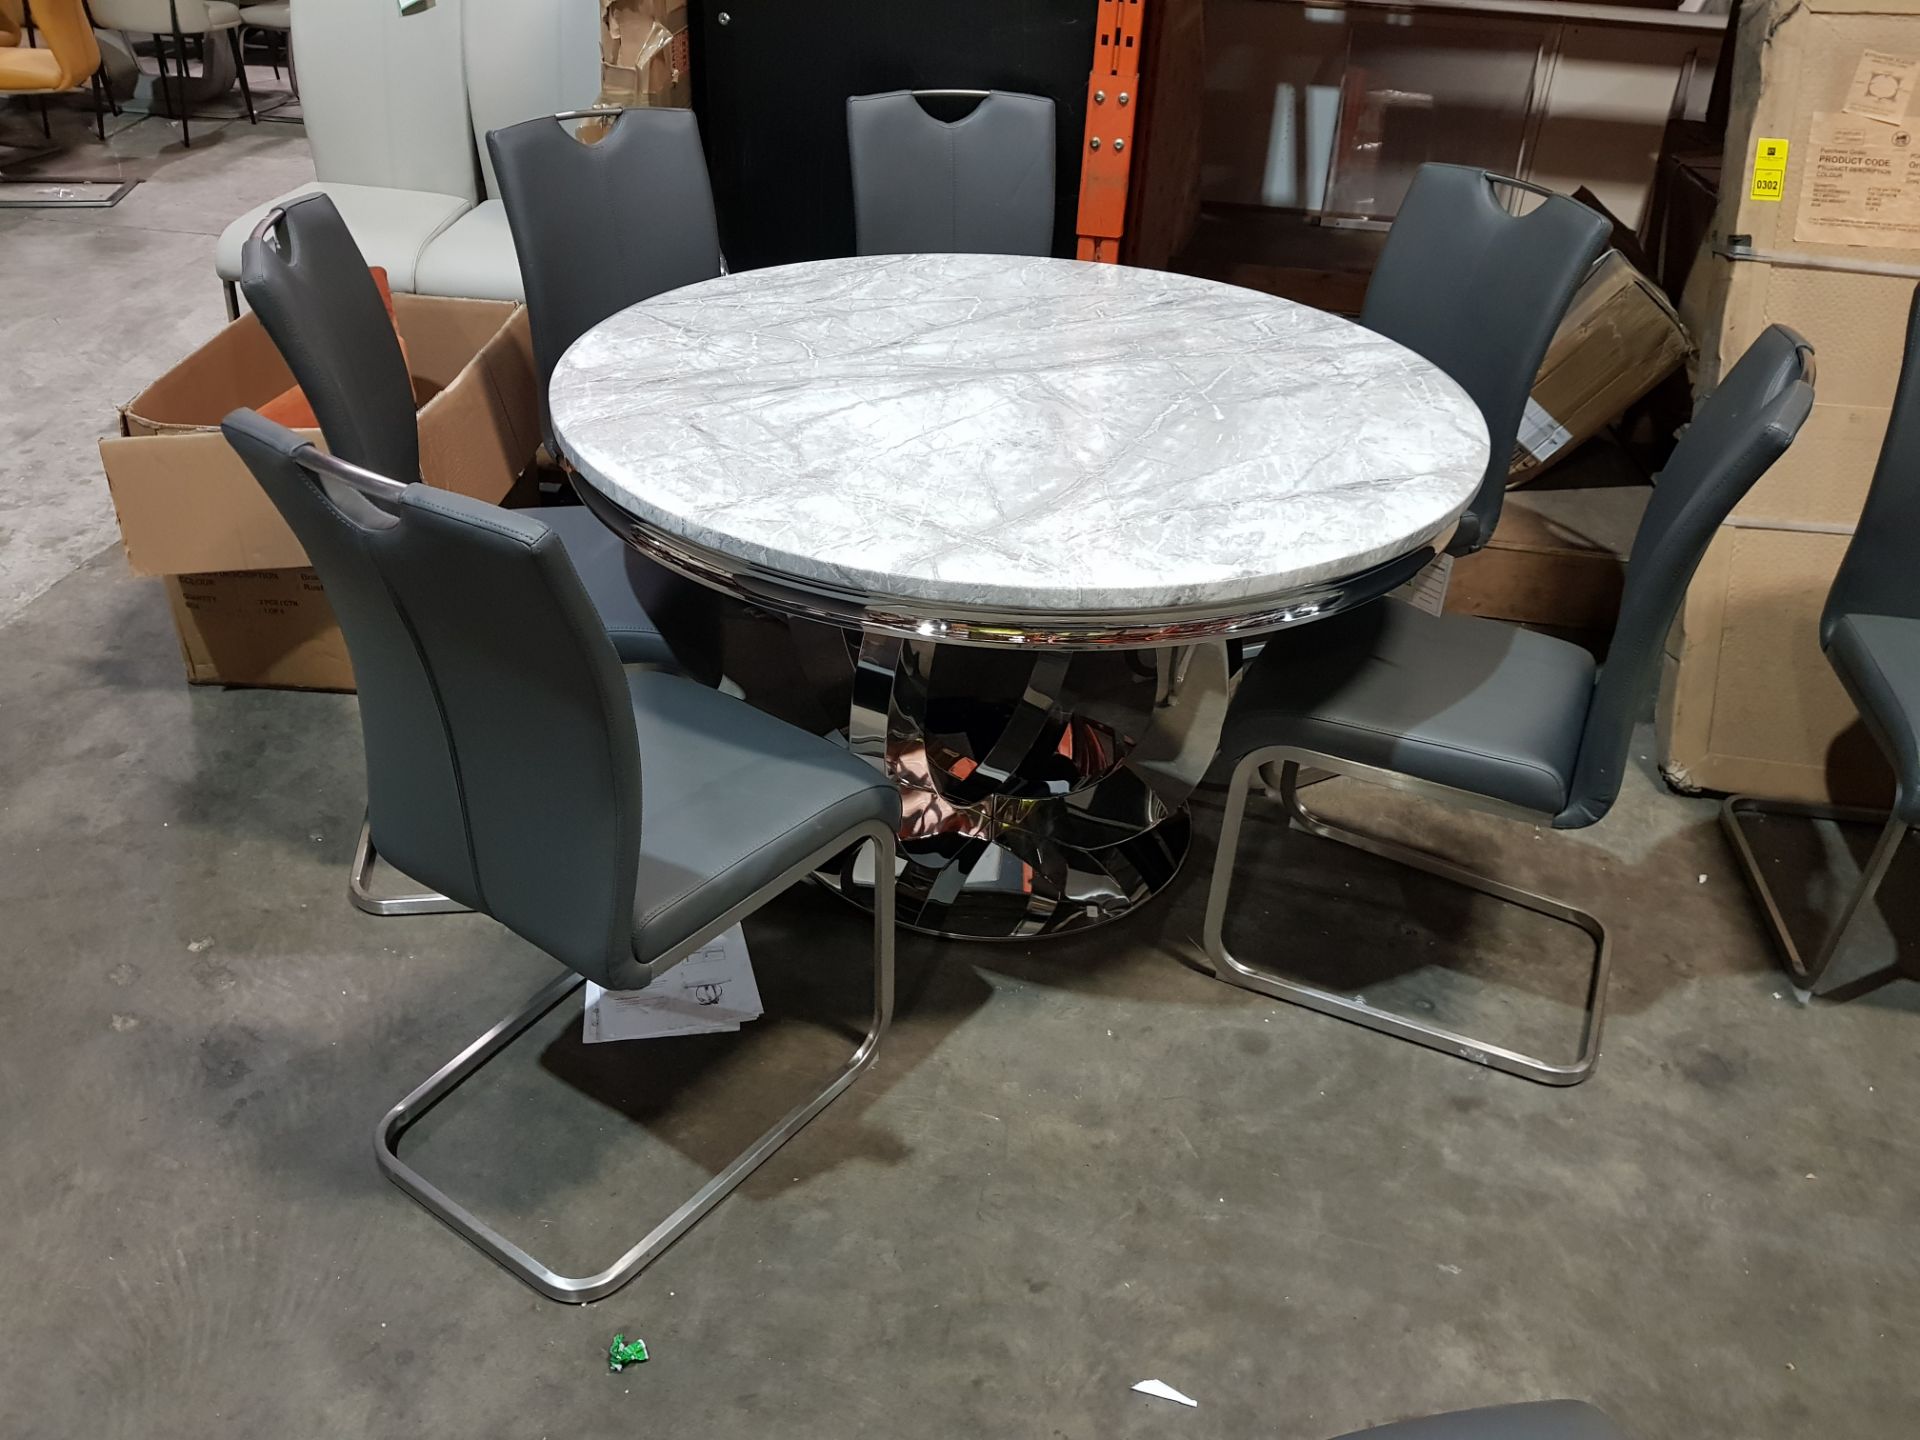 1 X GRANITE TOP ORACLE DINING TABLE 1300MM DIAMETER WITH 6 X LEATHER GREY DINING CHAIRS (PLEASE NOTE